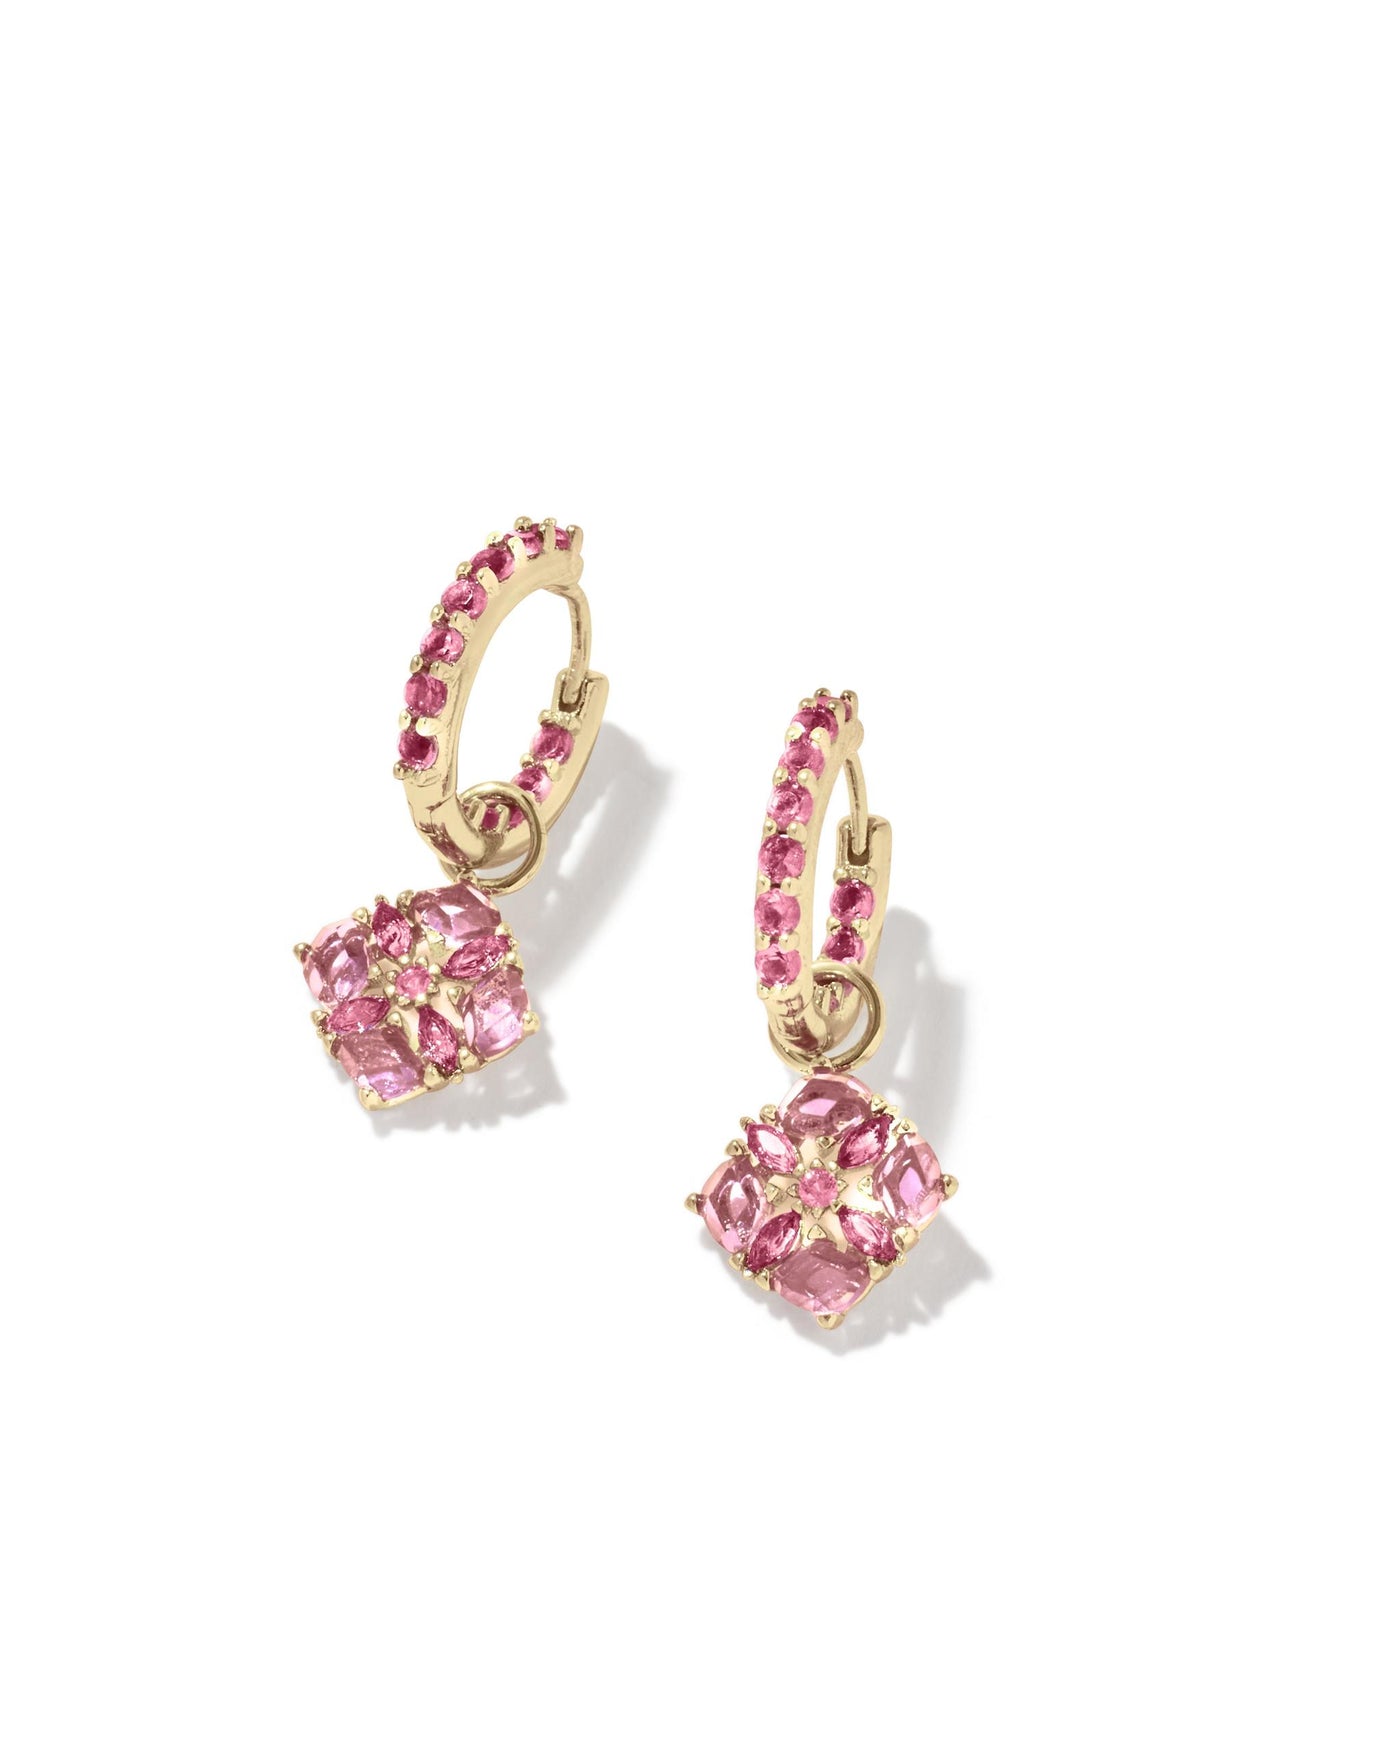 Gold Tone Earrings Featuring Pink Crystal by Kendra Scott